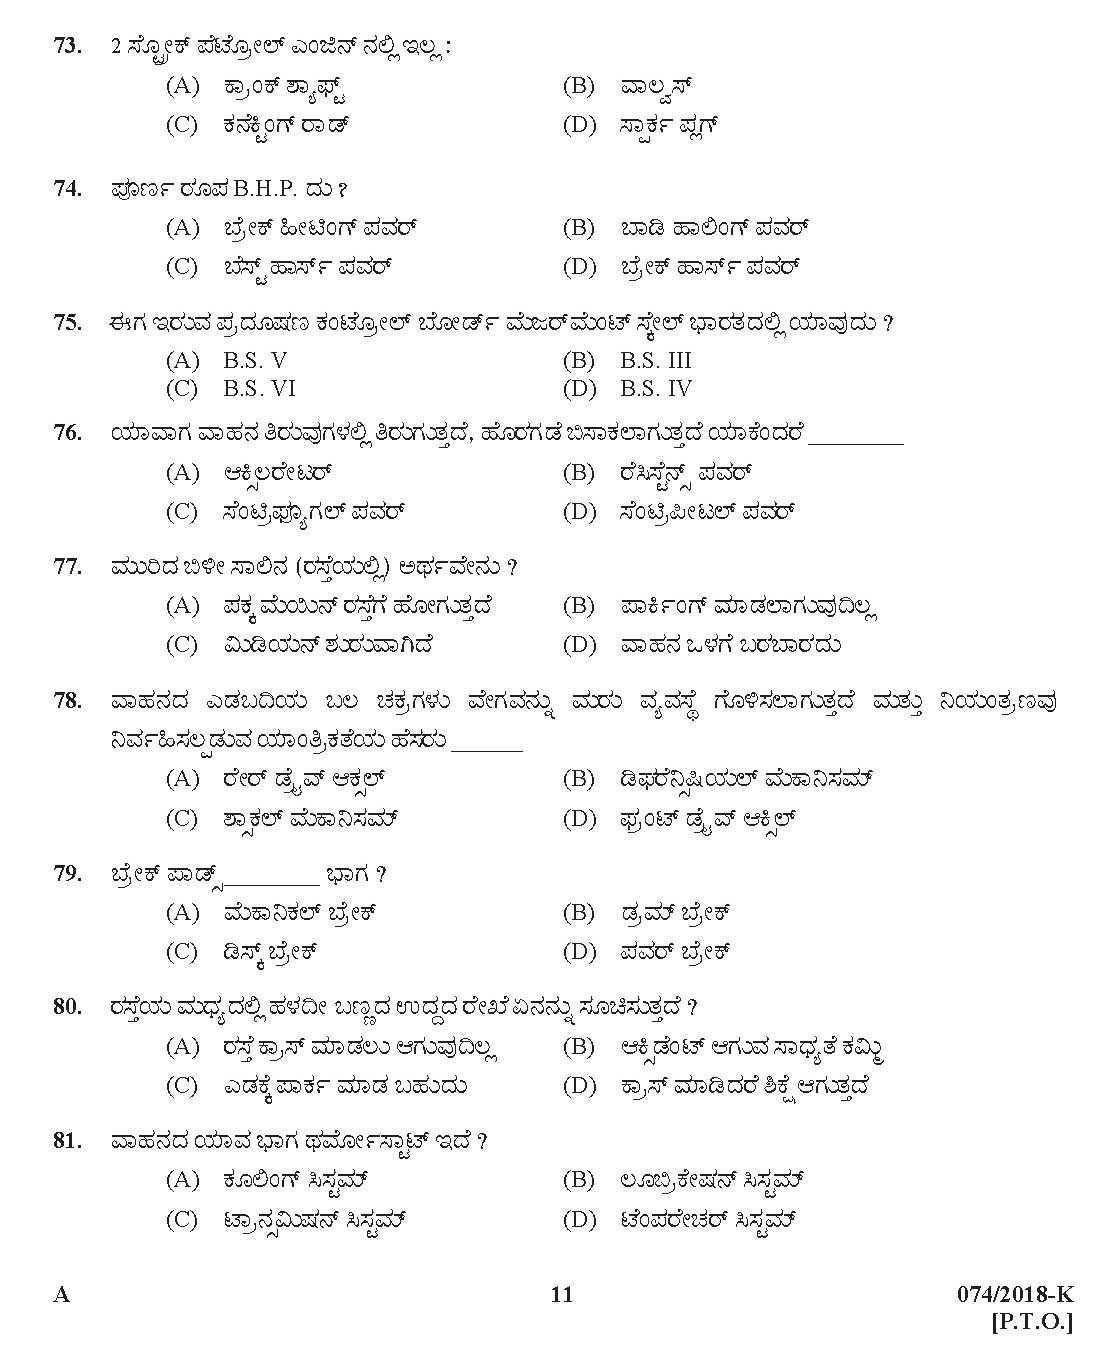 Kerala PSC Police Constable Driver Exam Question Paper Code 0742018 K 10